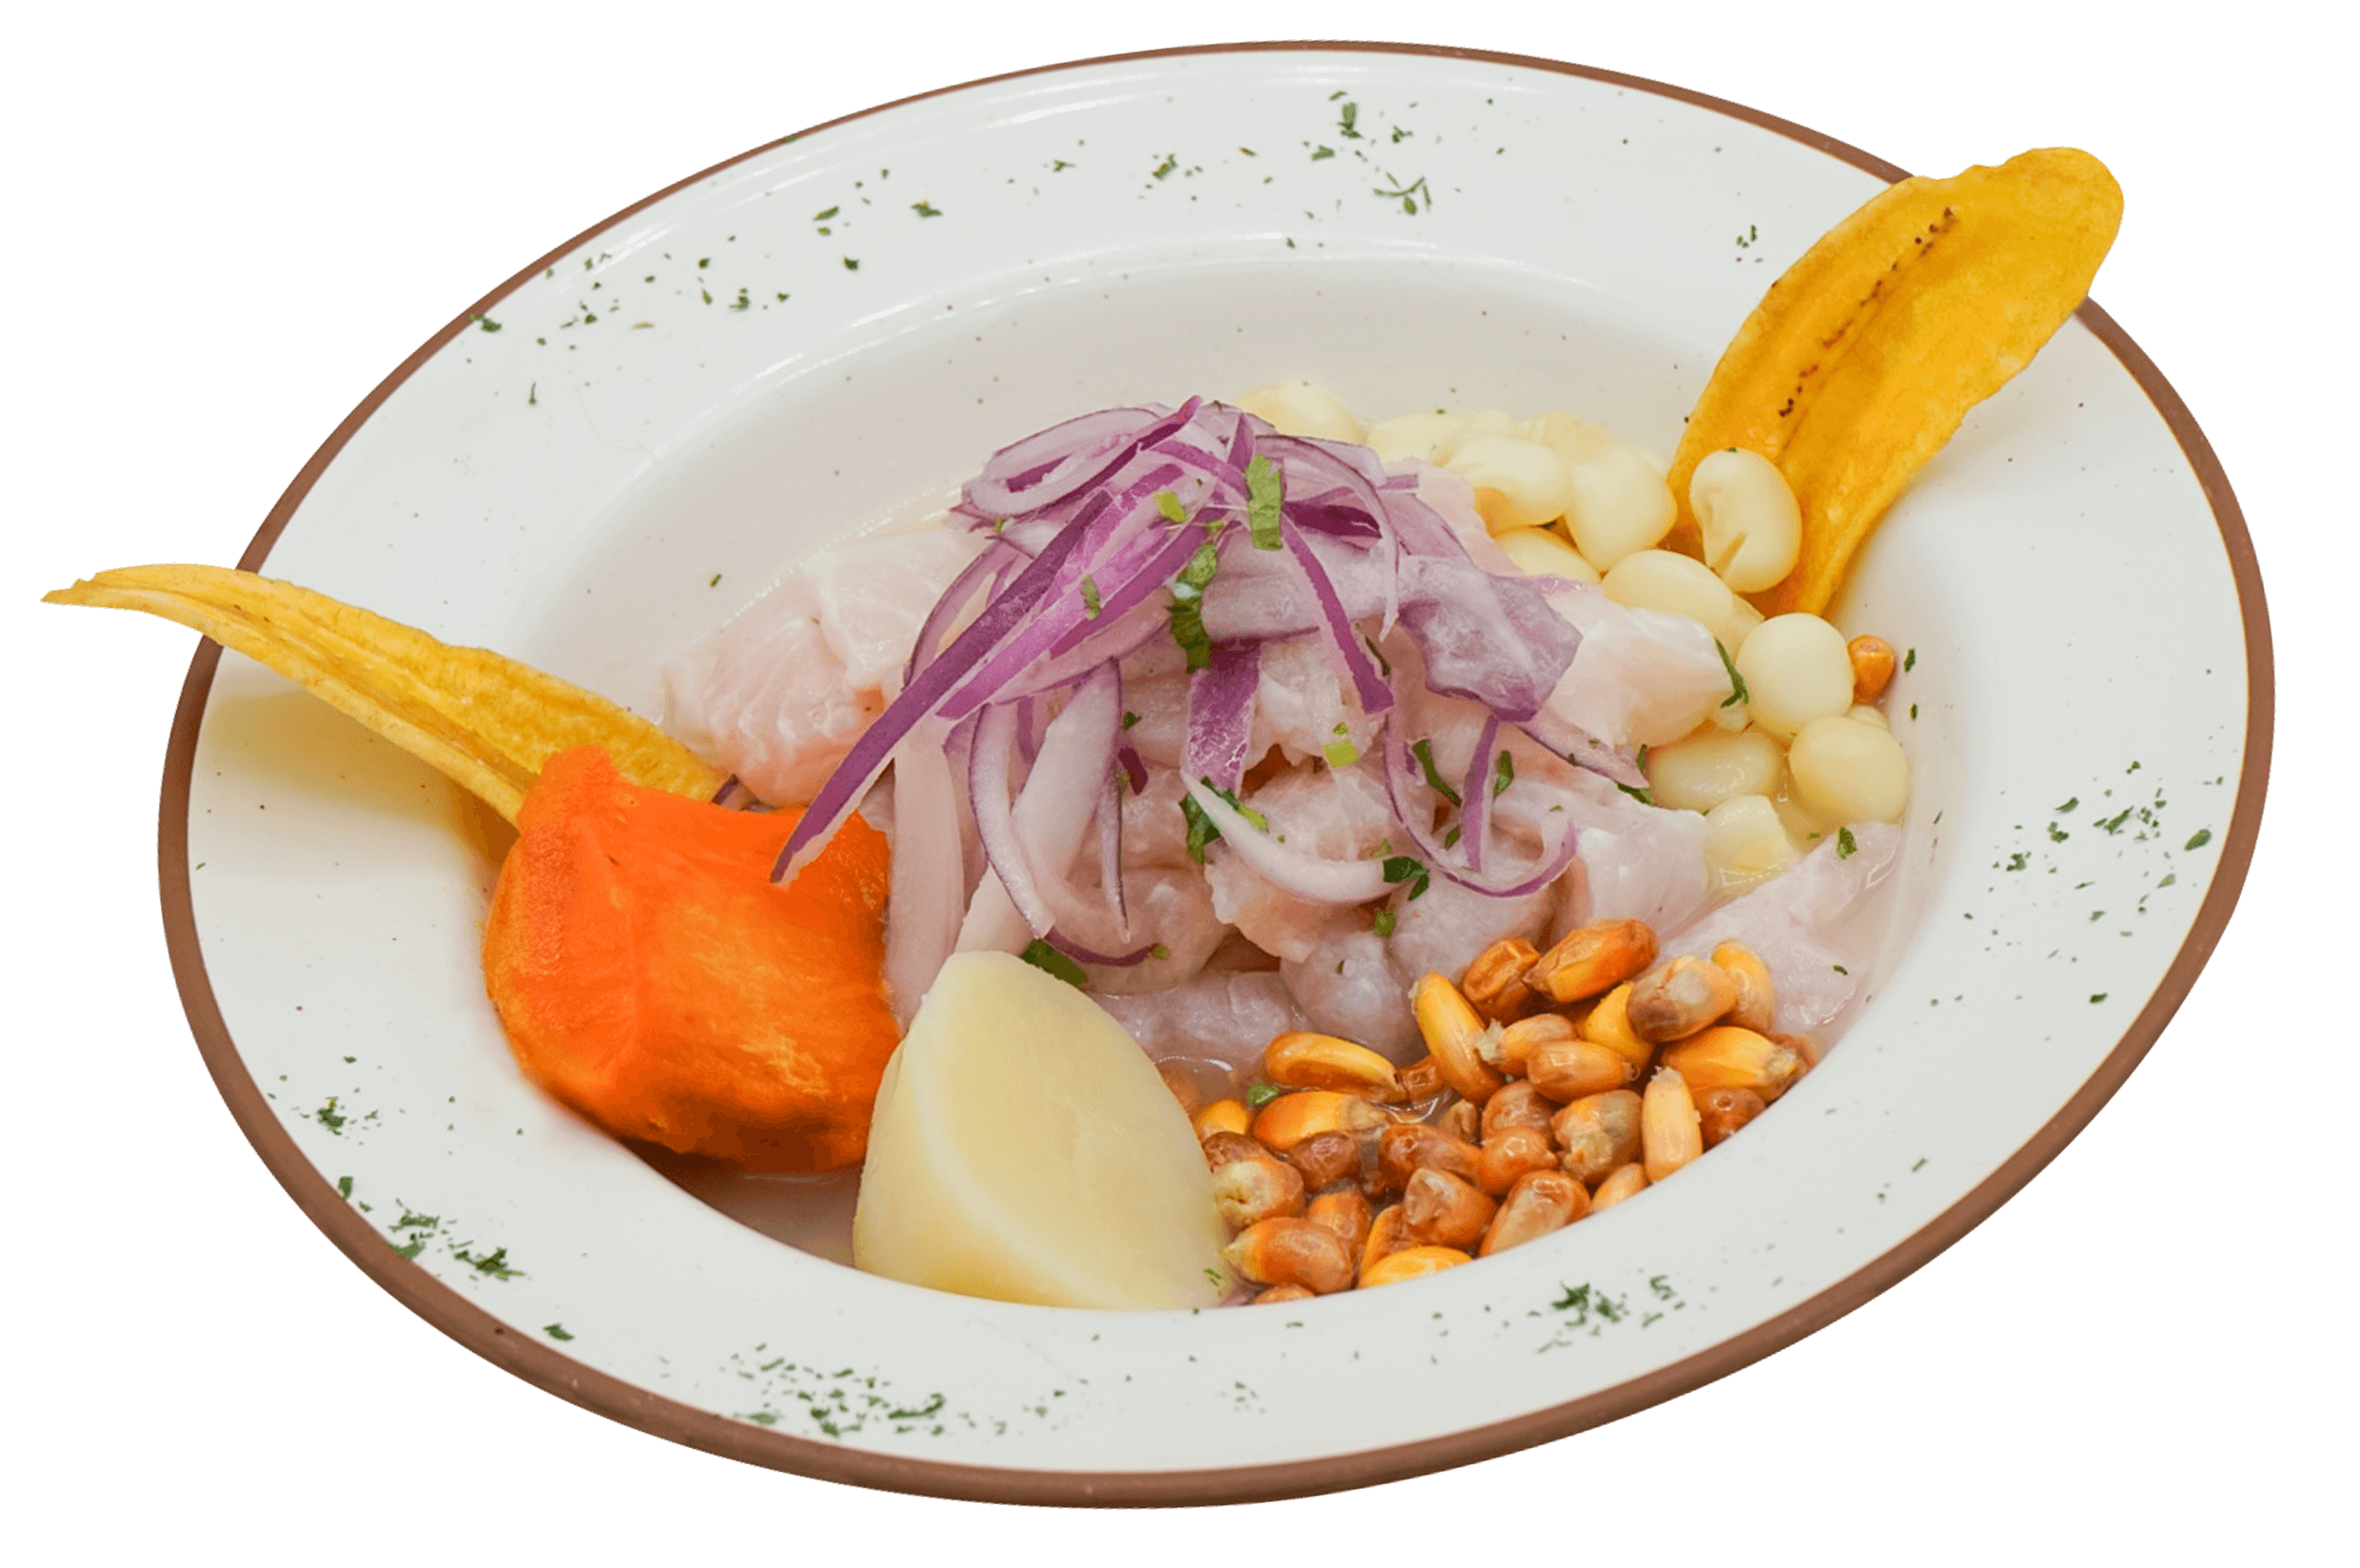 Mixed ceviche